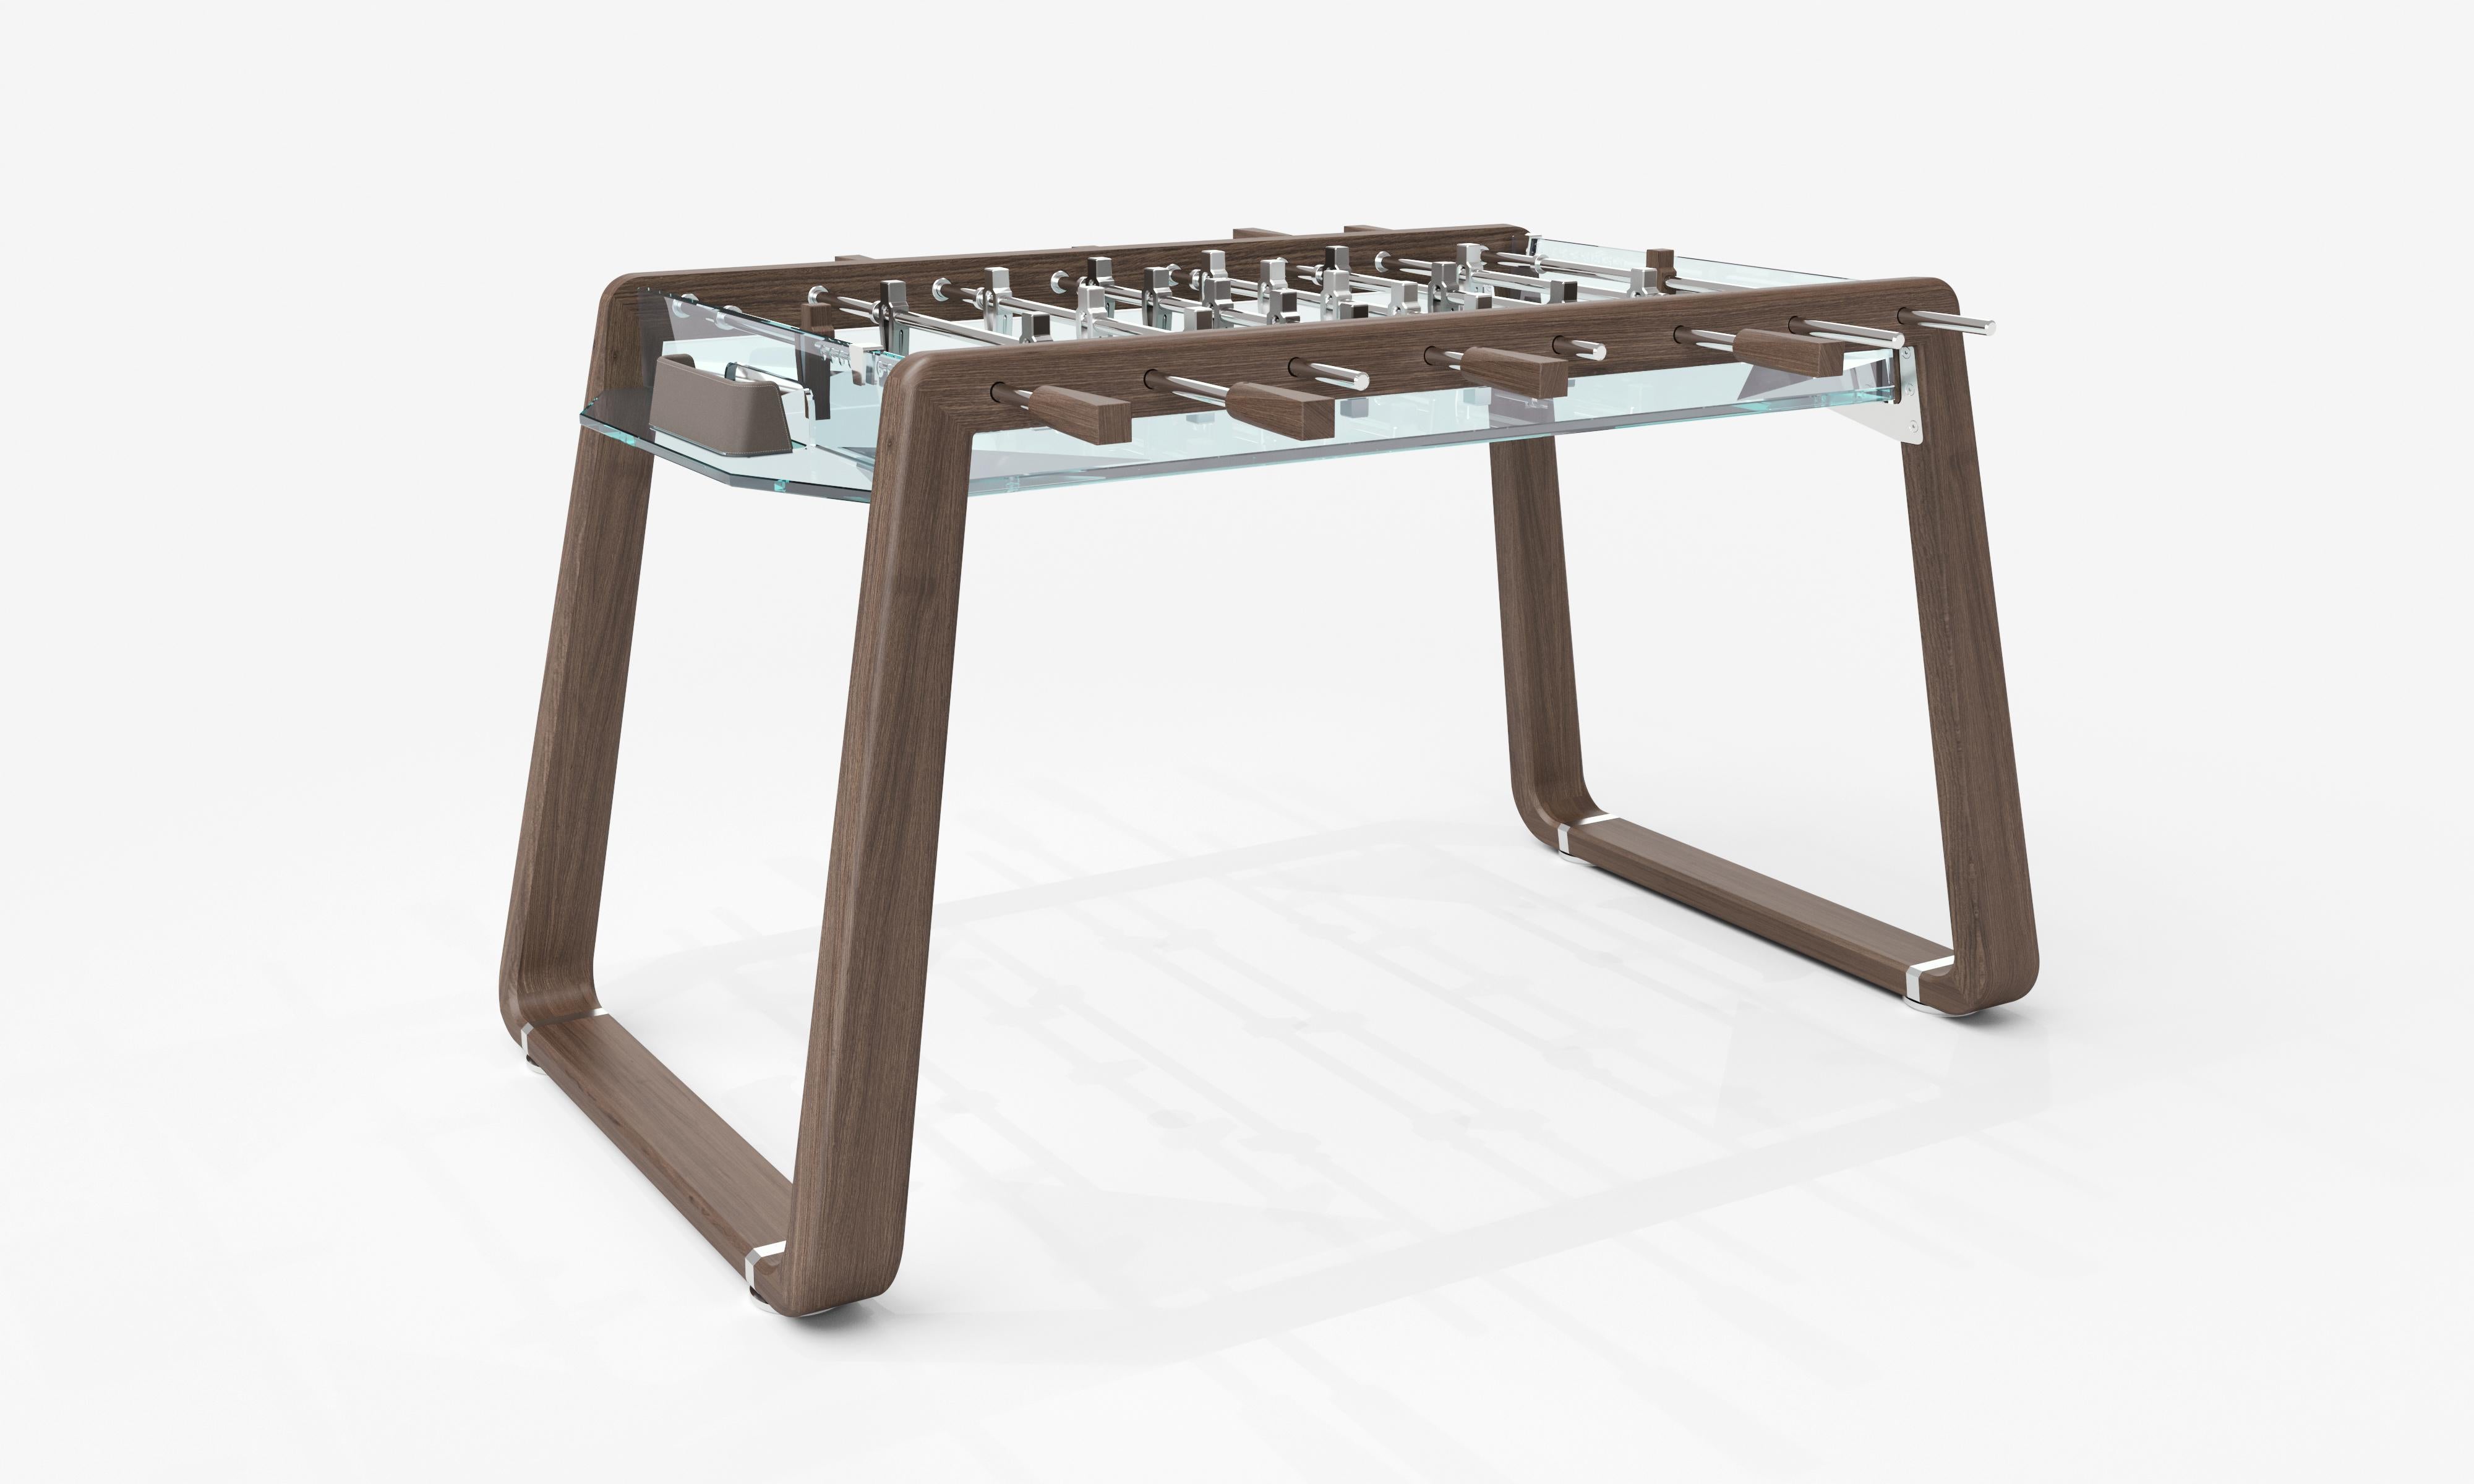 The Derby Wood is a visionary football table that pushes the boundaries of luxury design within the game table industry. Ambitiously reinterpreting the classics, this piece demonstrates the sophistication and ingenuity of Italian design and